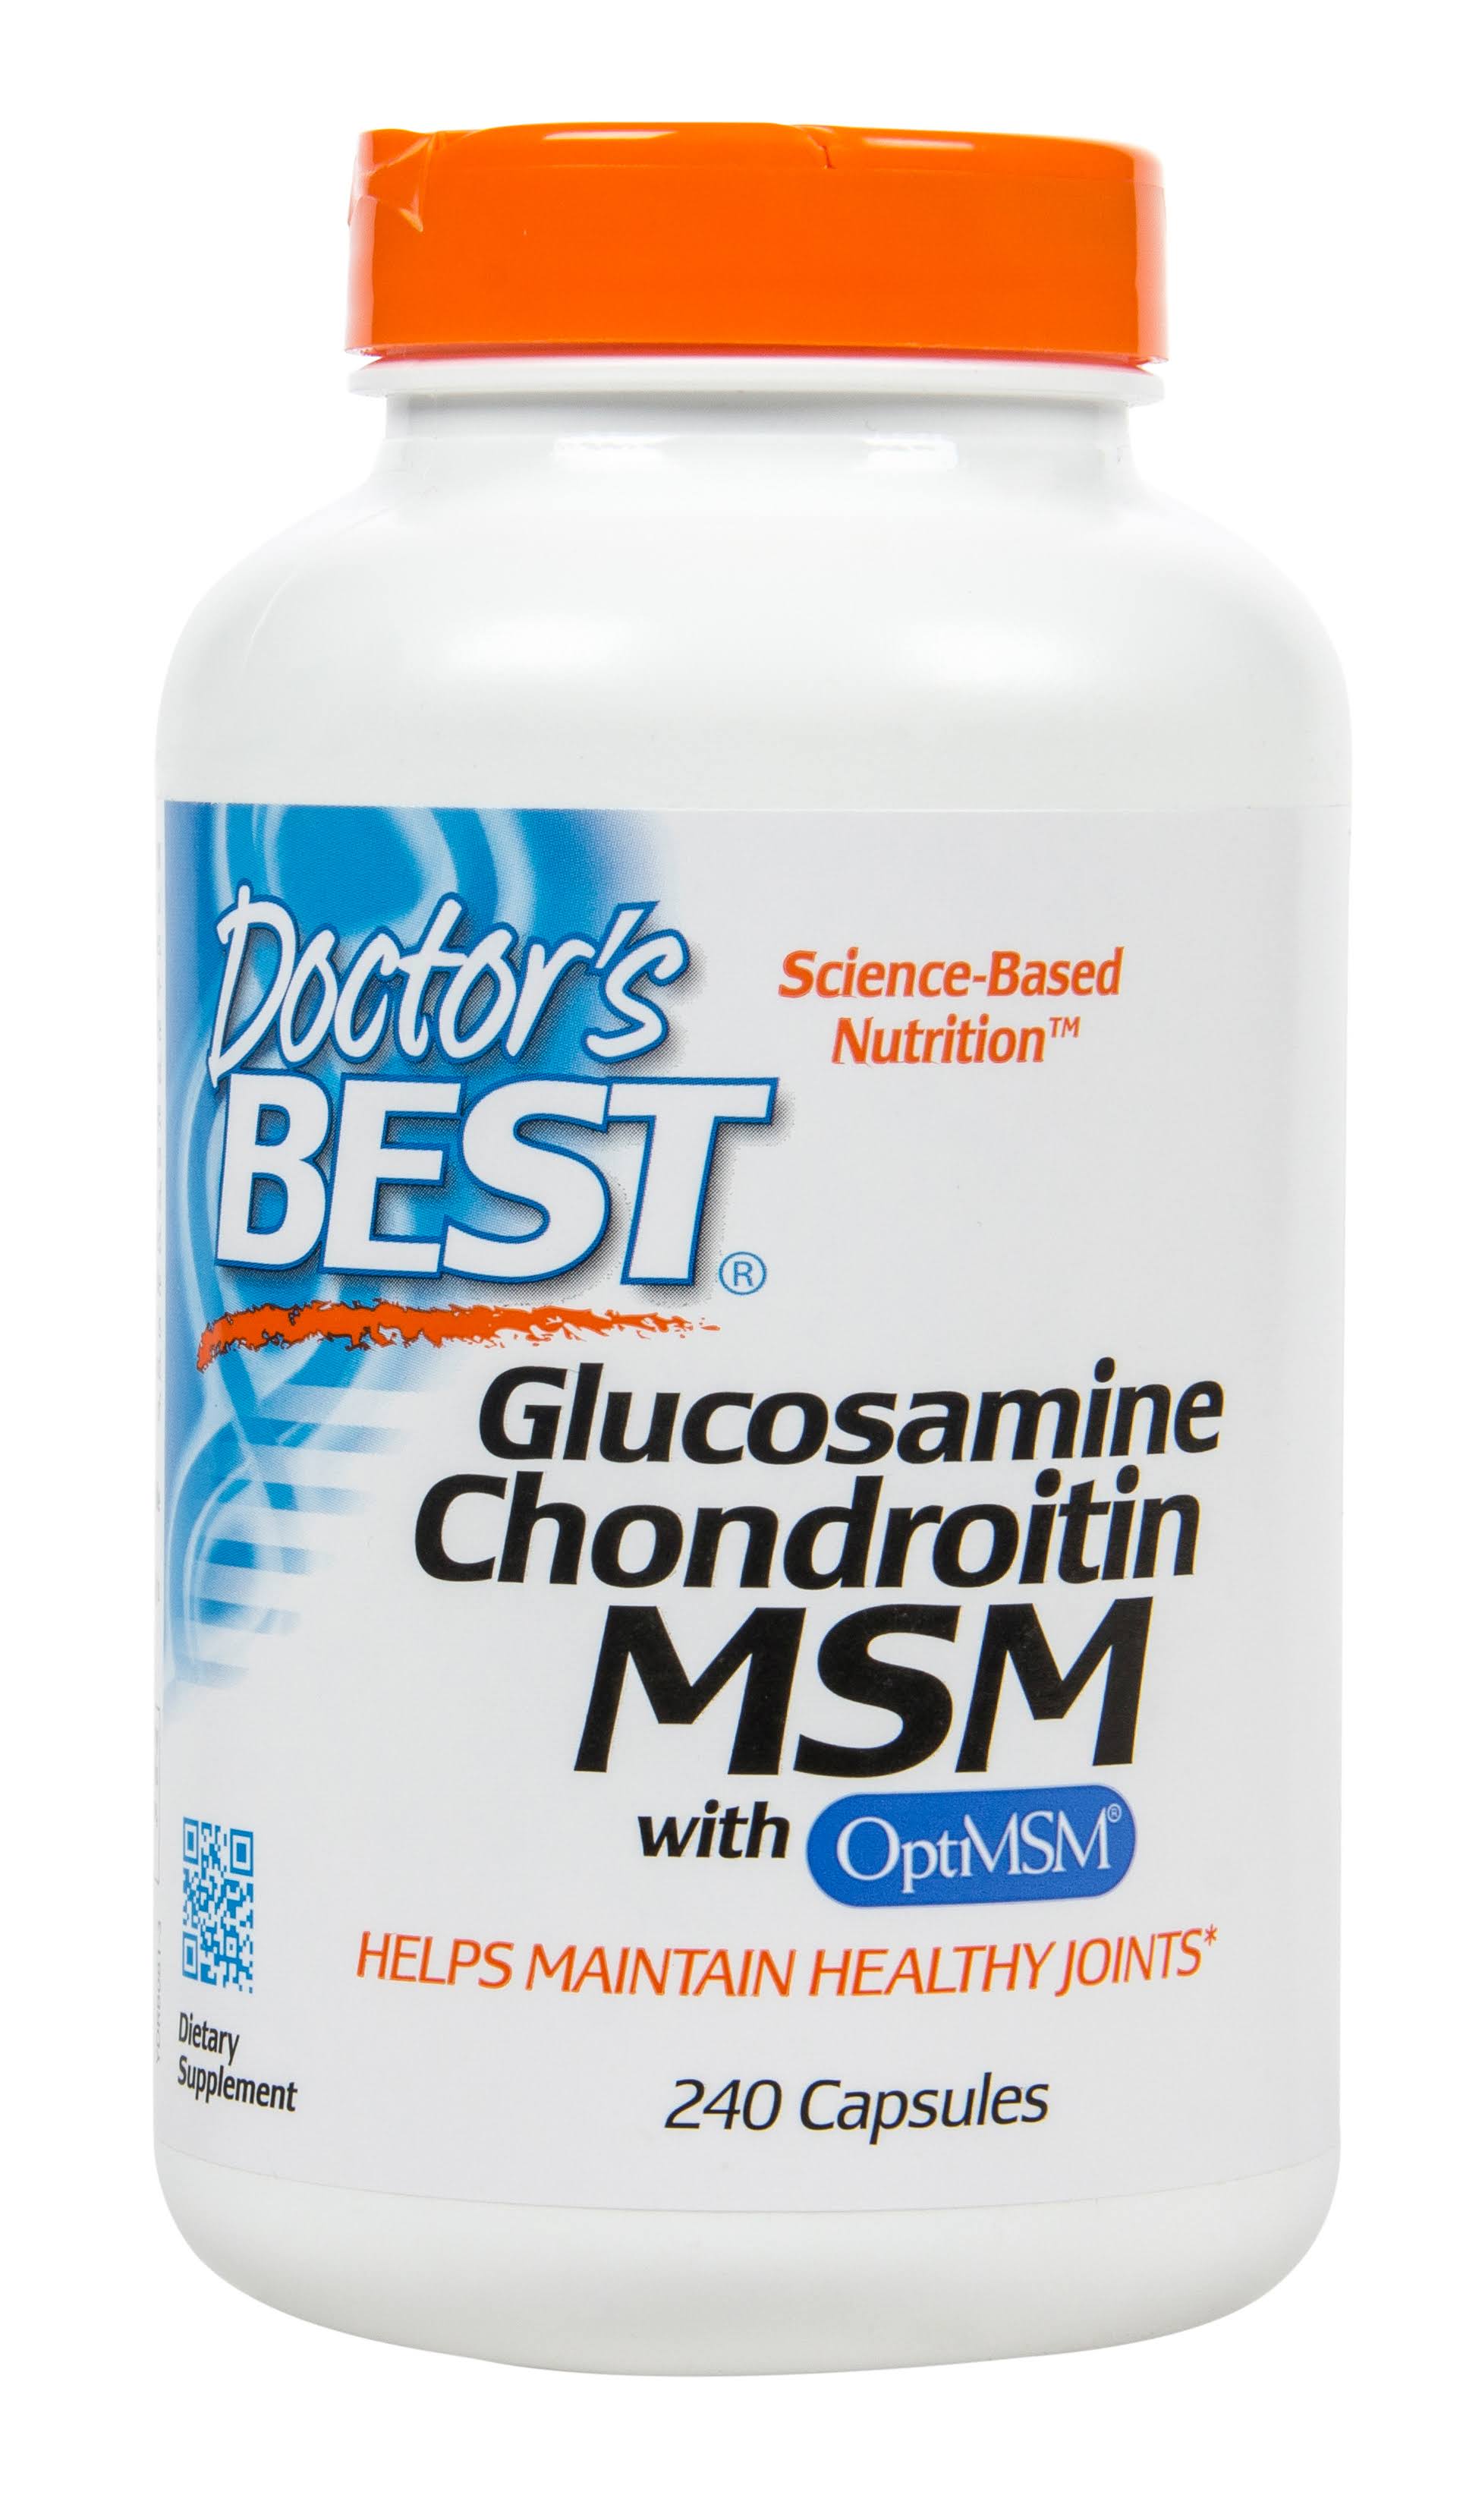 Doctor's Best Glucosamine Chondroitin MSM Capsules - 240-Count